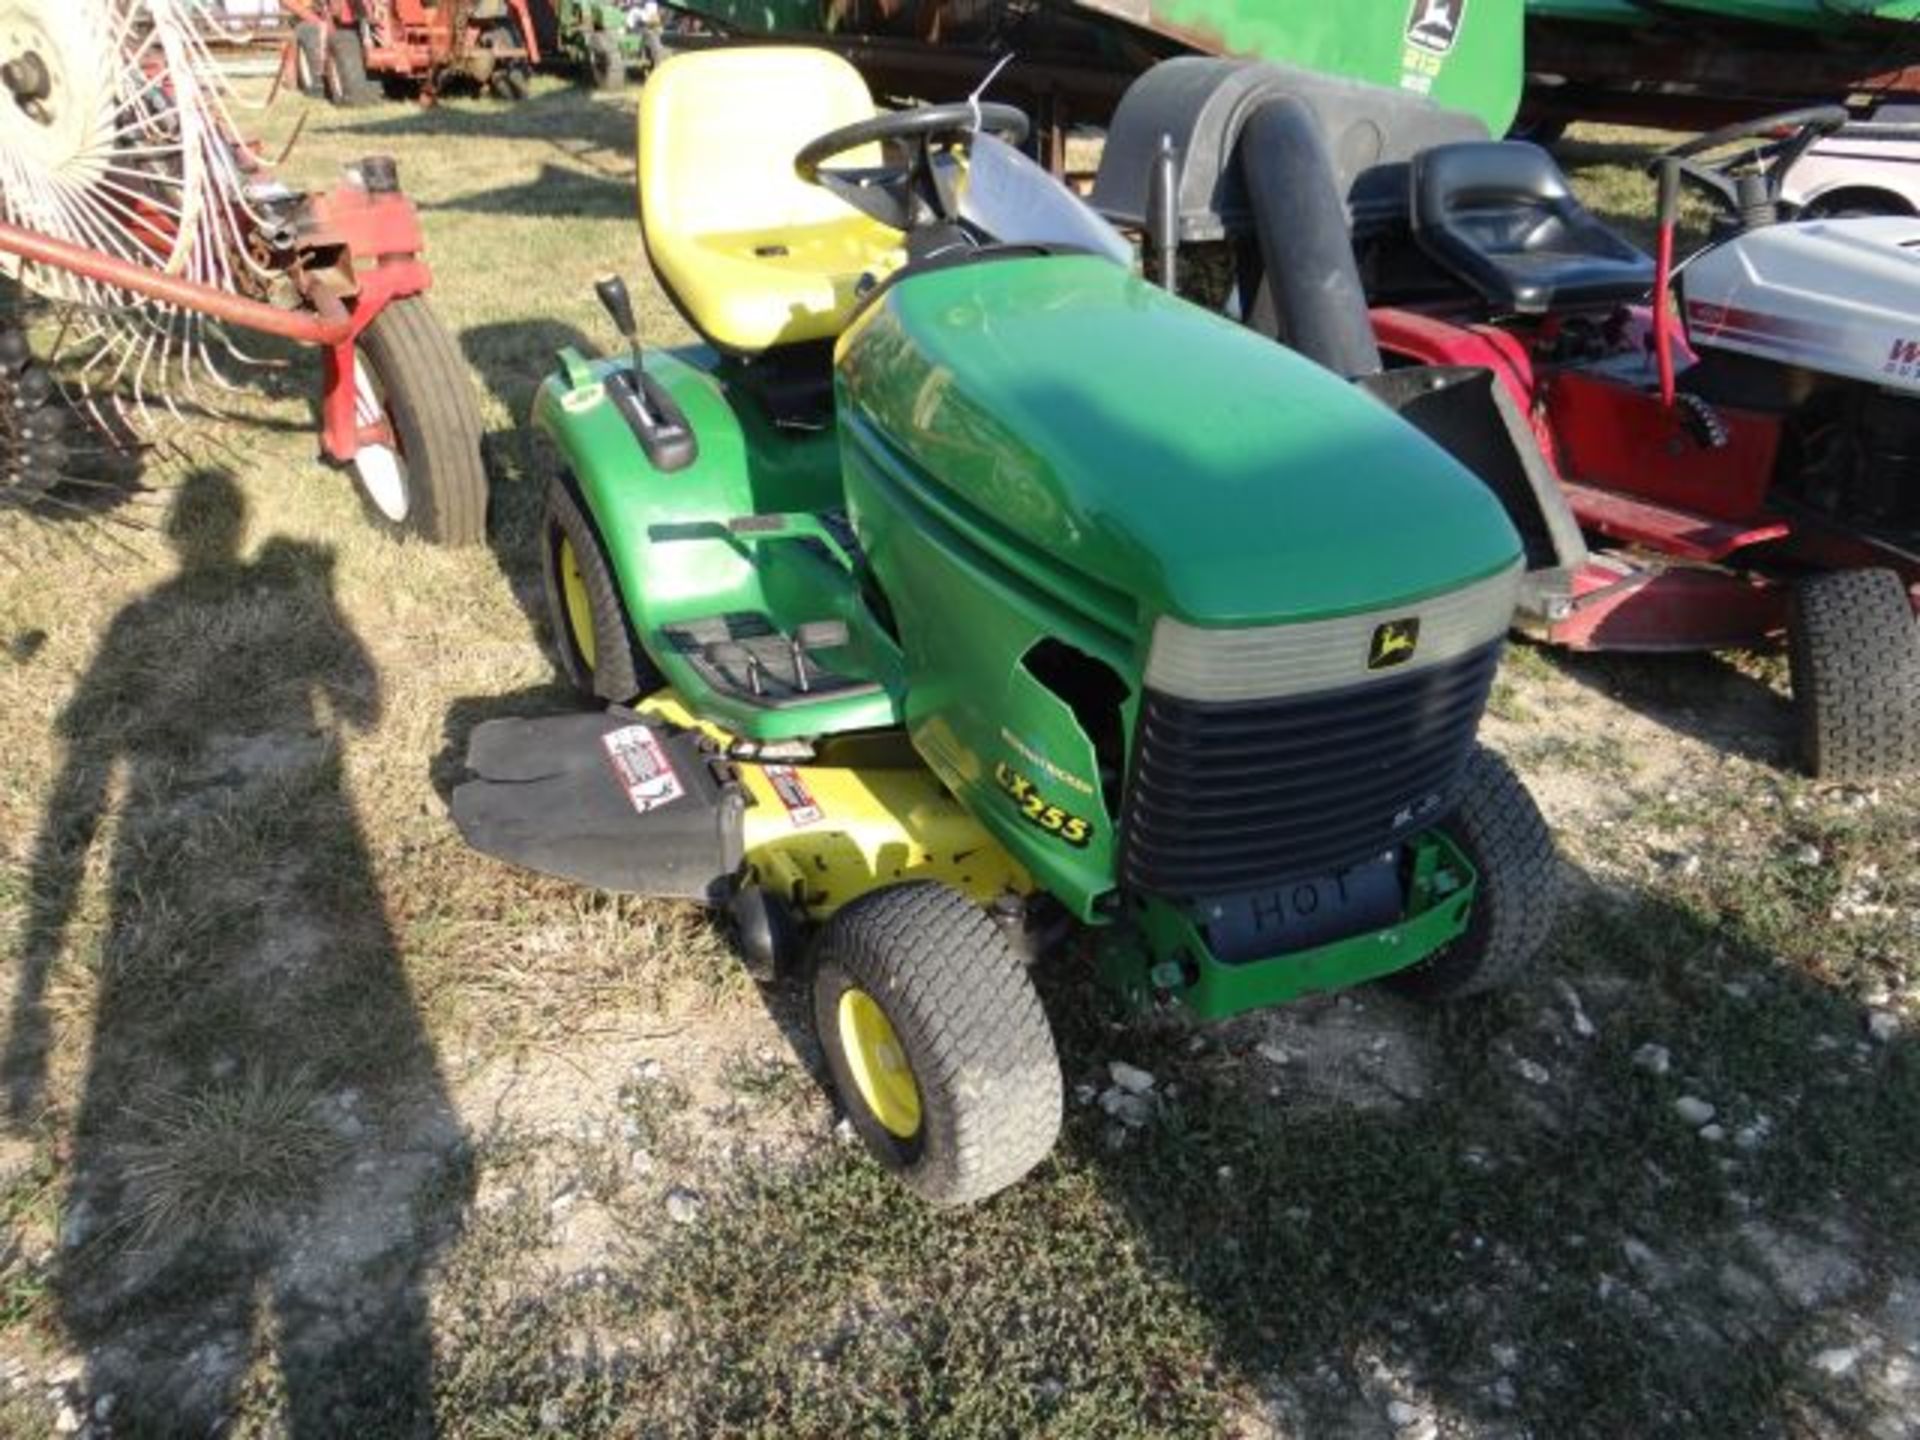 JD LX255 Riding Mower, 2000 #65784, 15hp, Air Cooled, Hydro, 42" Deck - Image 3 of 3